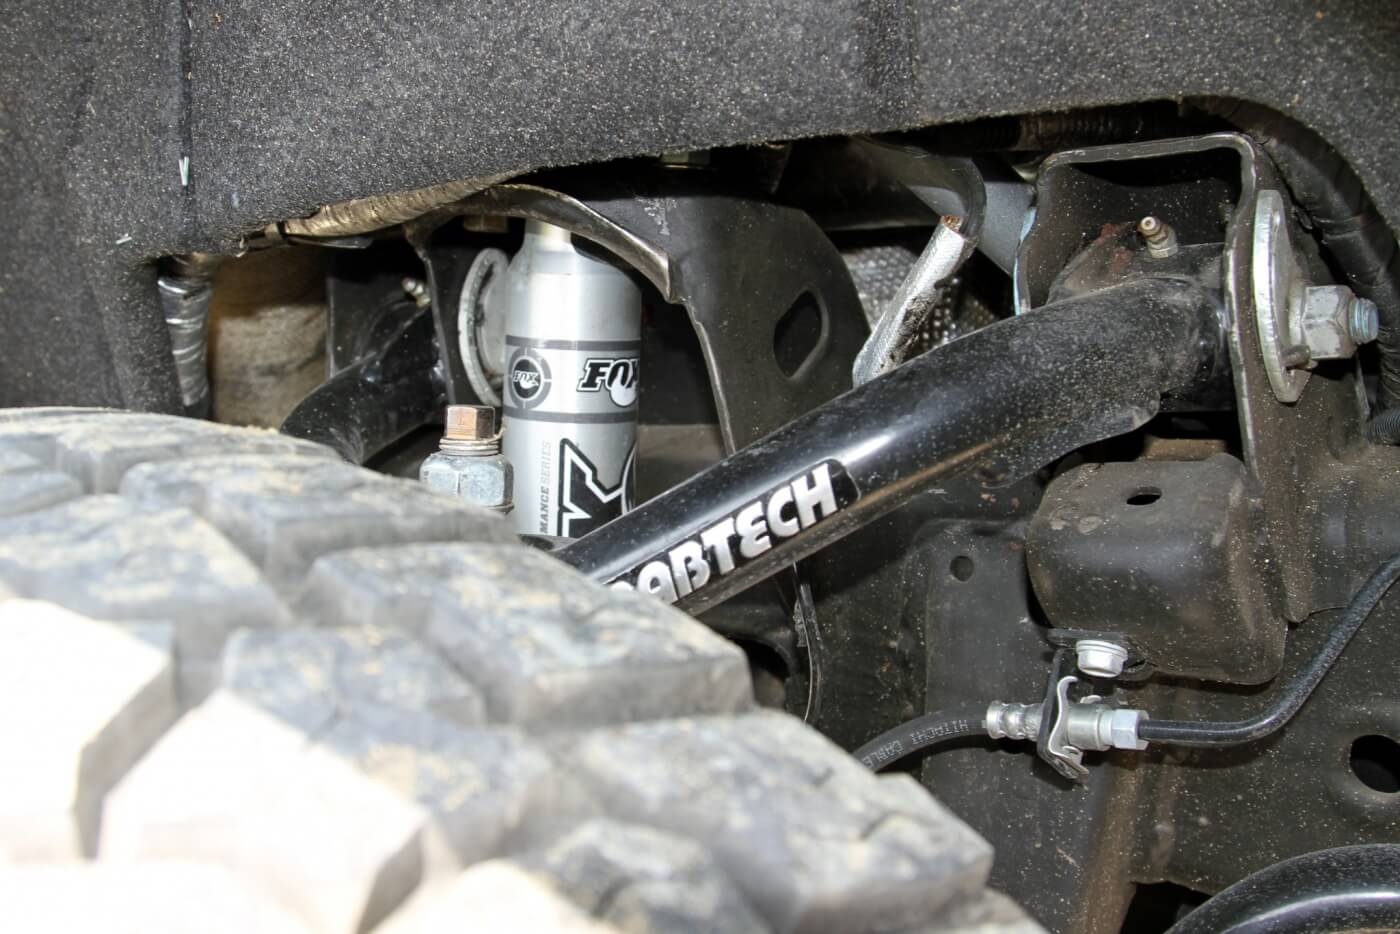 The front suspension features a 4-inch Fabtech lift kit modified to provide 3 inches of lift as well as Fabtech Uniball control arms and Fox Racing Shox. Cognito idler and pitman arm braces beef up the steering system.